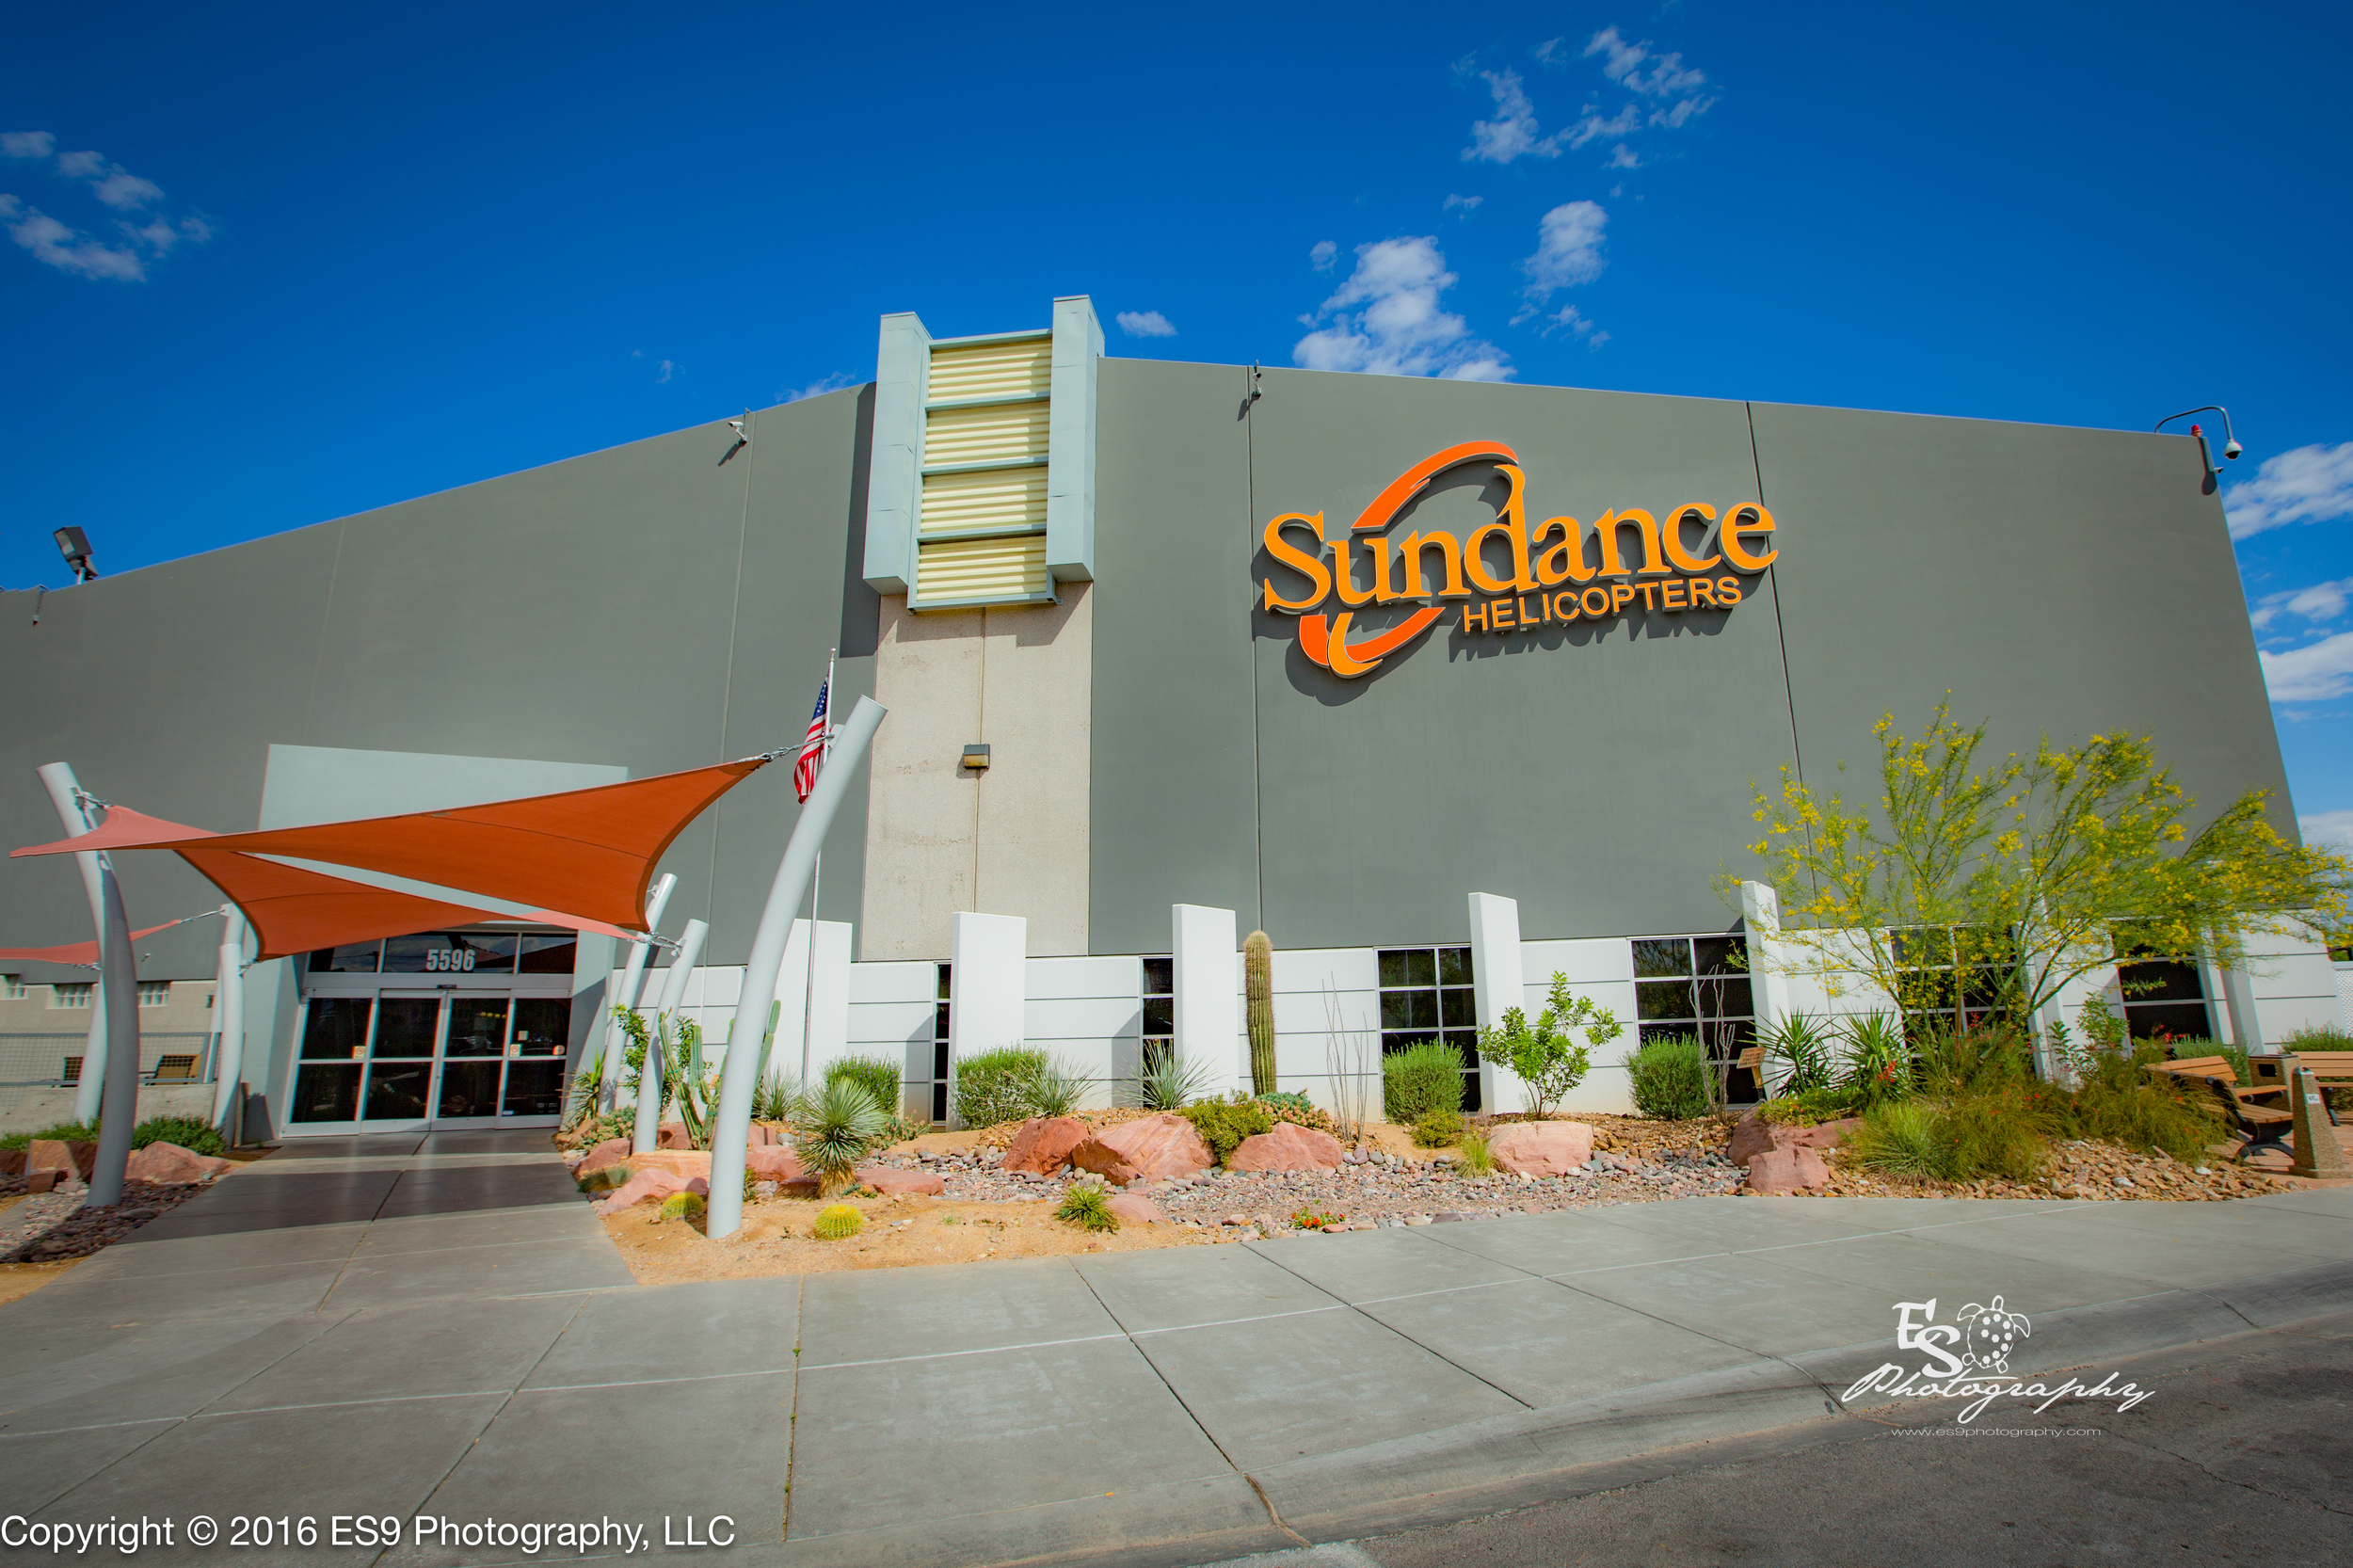 Sundance Helicopters Arrival @ ES9 Photography 2016.jpg